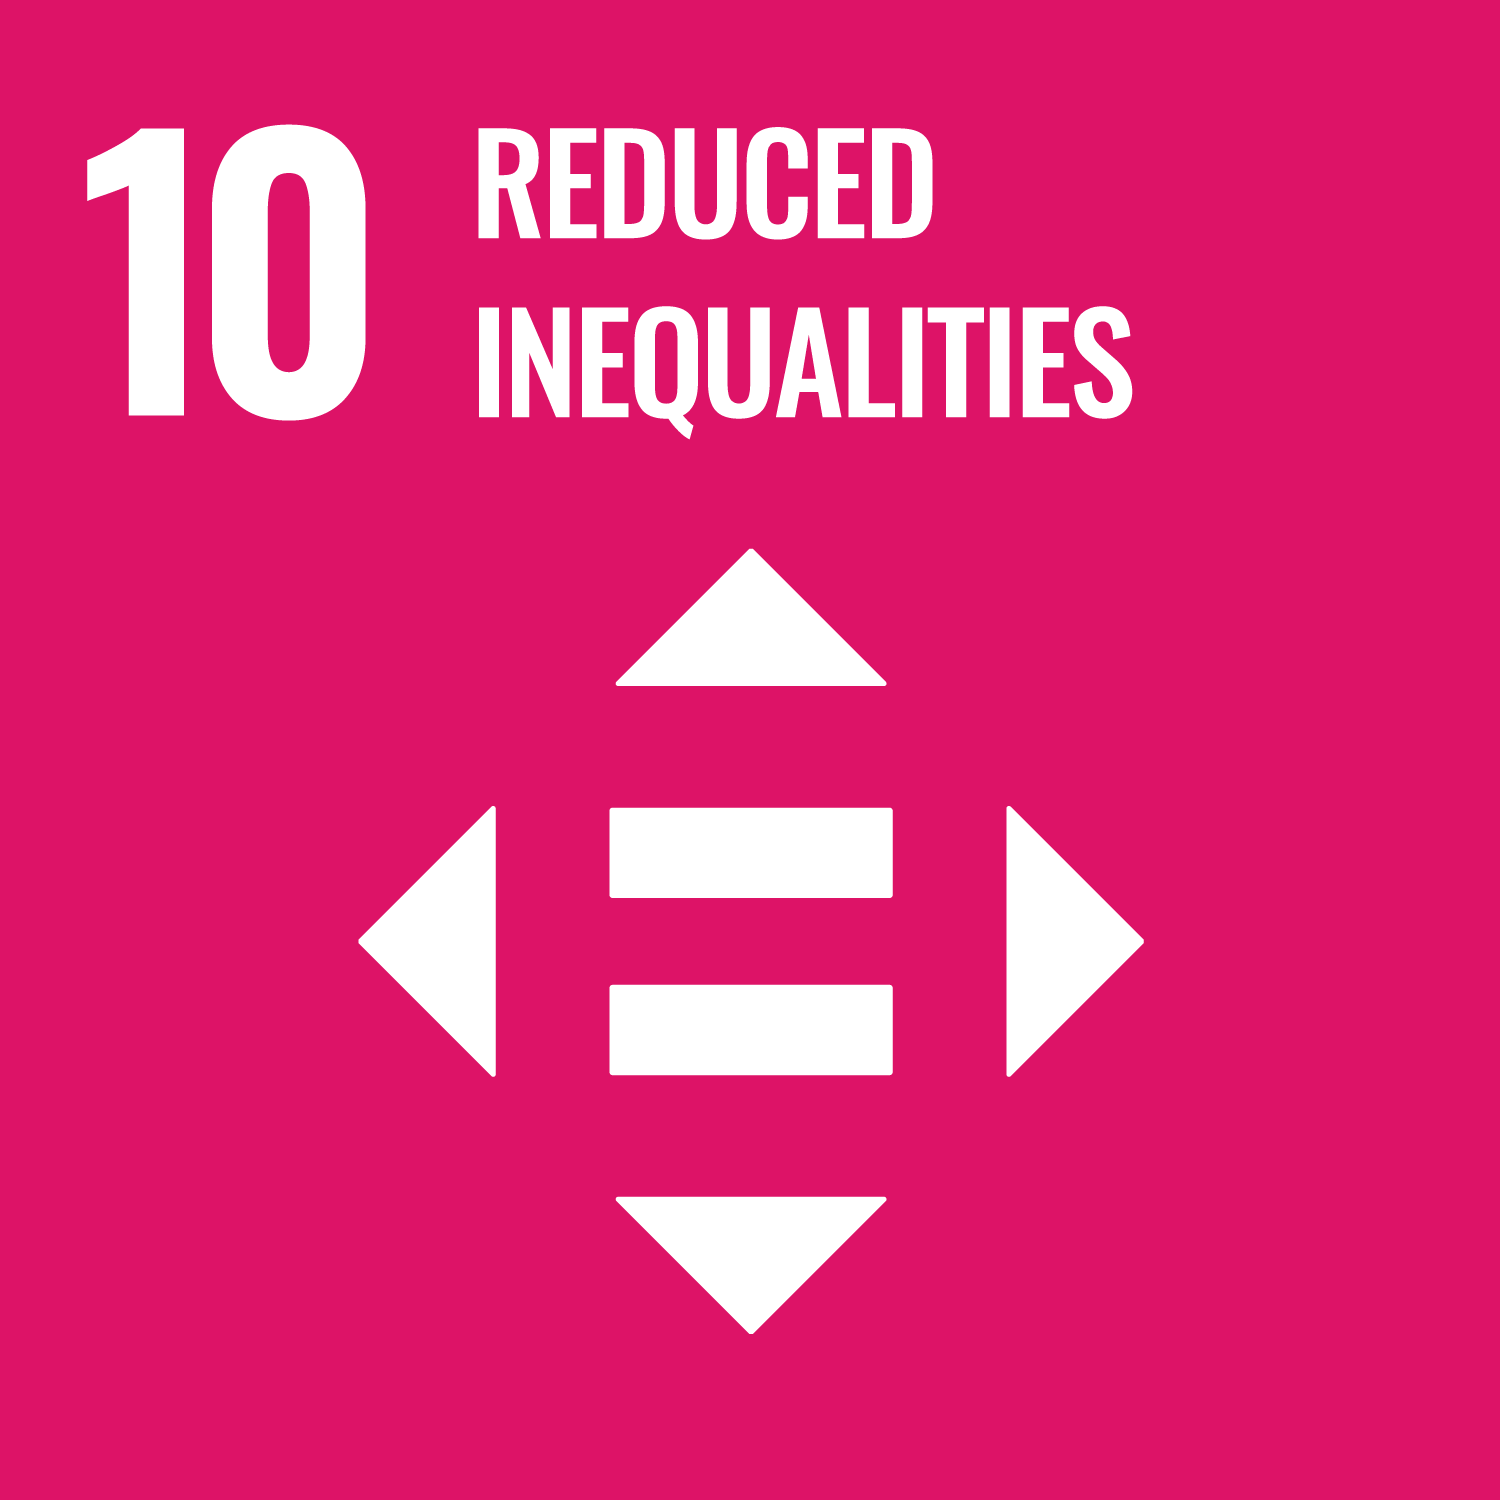 The official logo of the United Nations Sustainable Development Goal #10: Reduced inequalities.